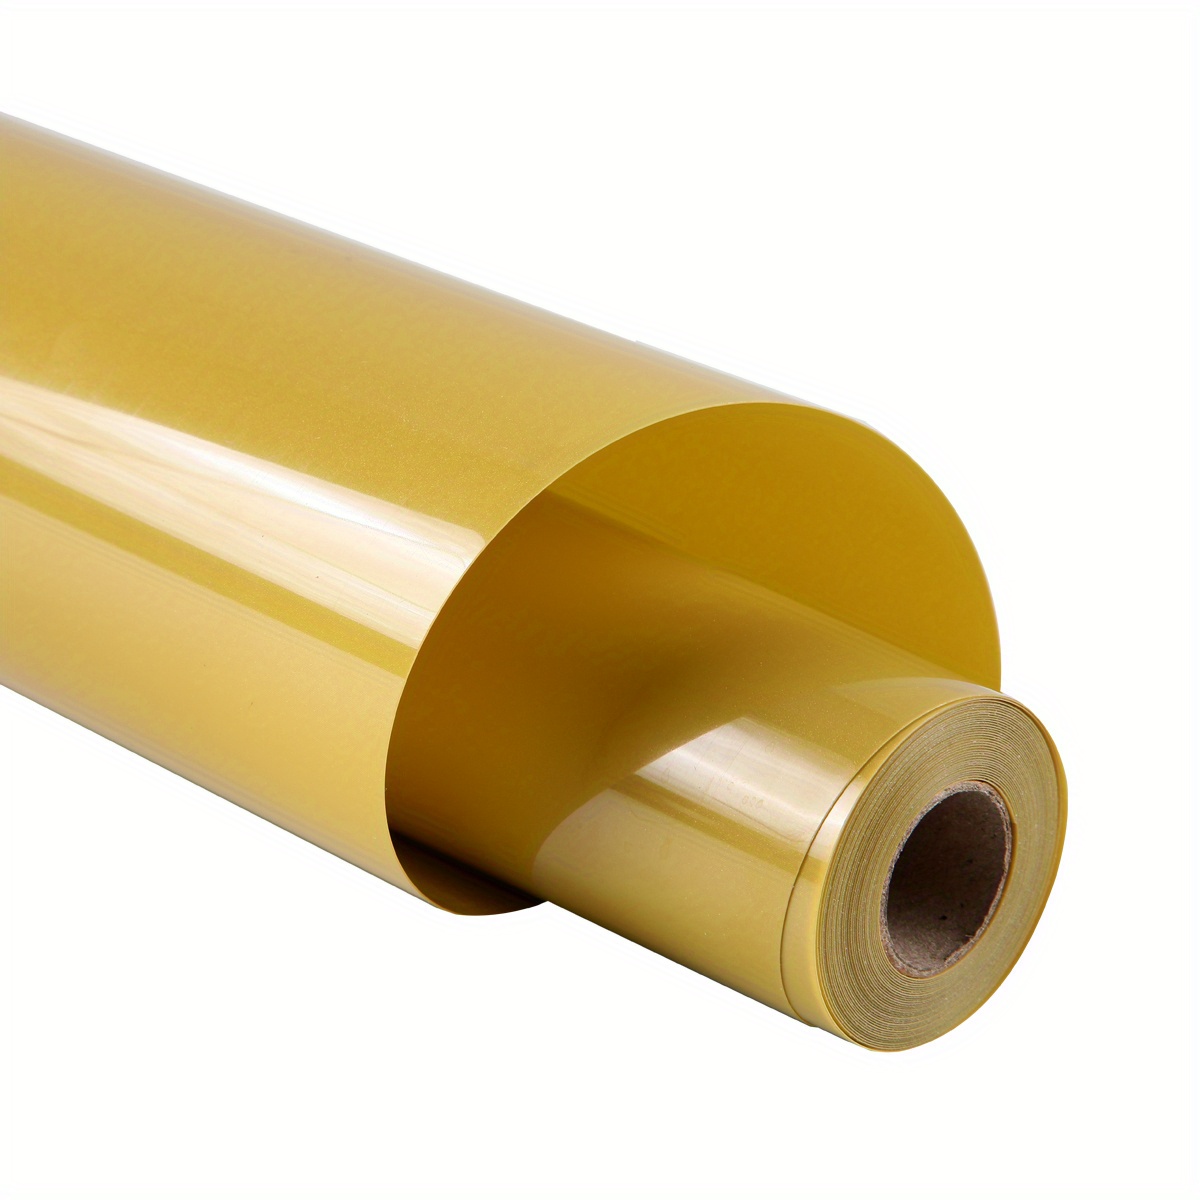 guangyintong HTV Heat Transfer Vinyl Rolls 12 x 12ft - PU Gold Iron on  Vinyl Easy to Cut &Weed, Glossy Surface (Gold B7)